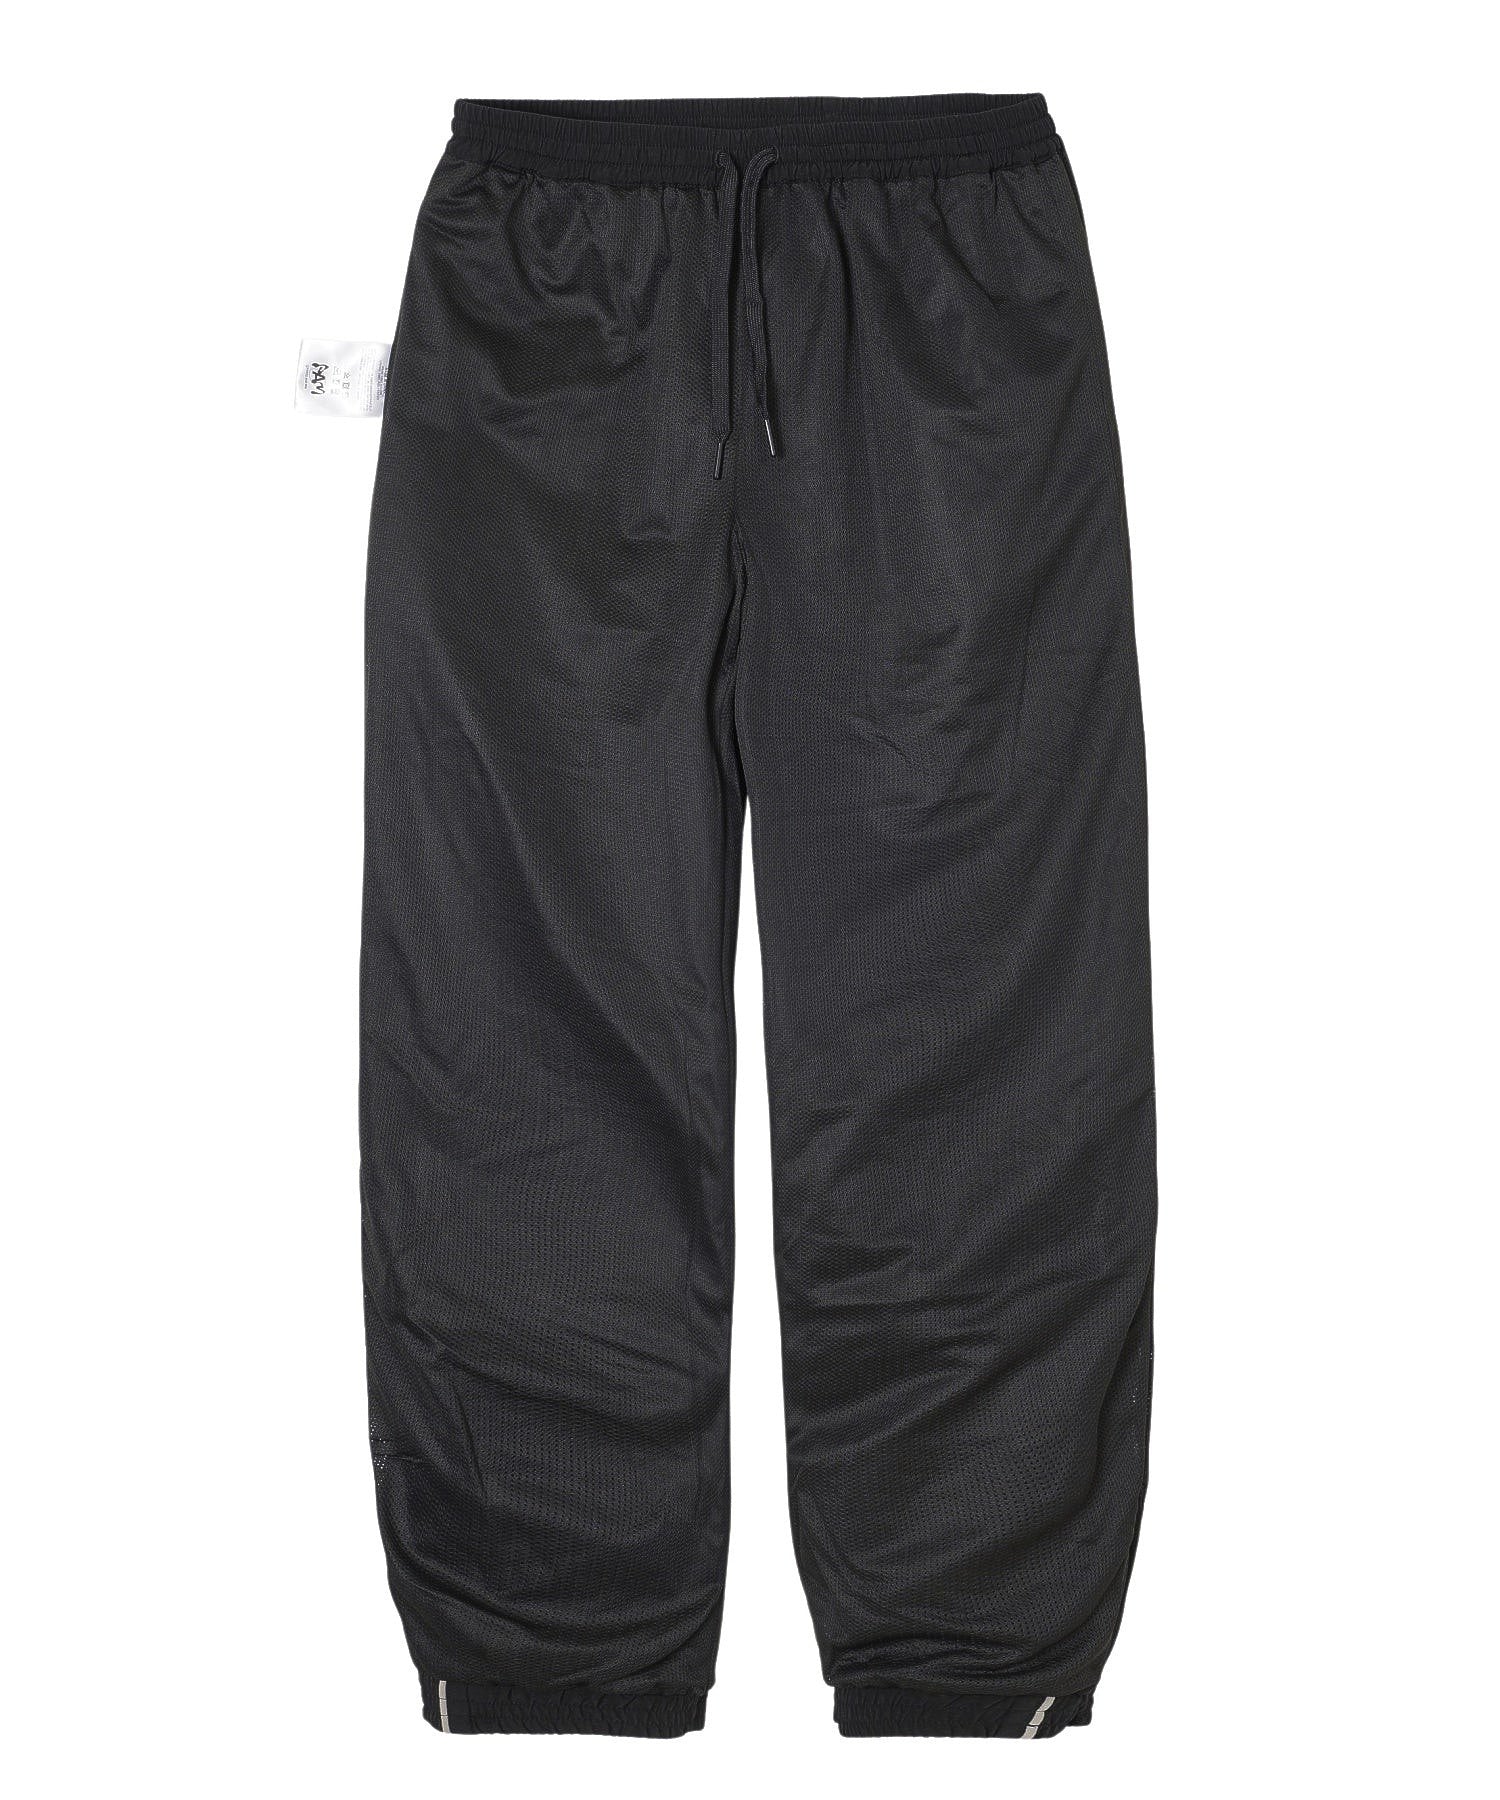 PERKS AND MINI/パークスアンドミニ/TRACKTION PANELLED TRACK PANT/8532